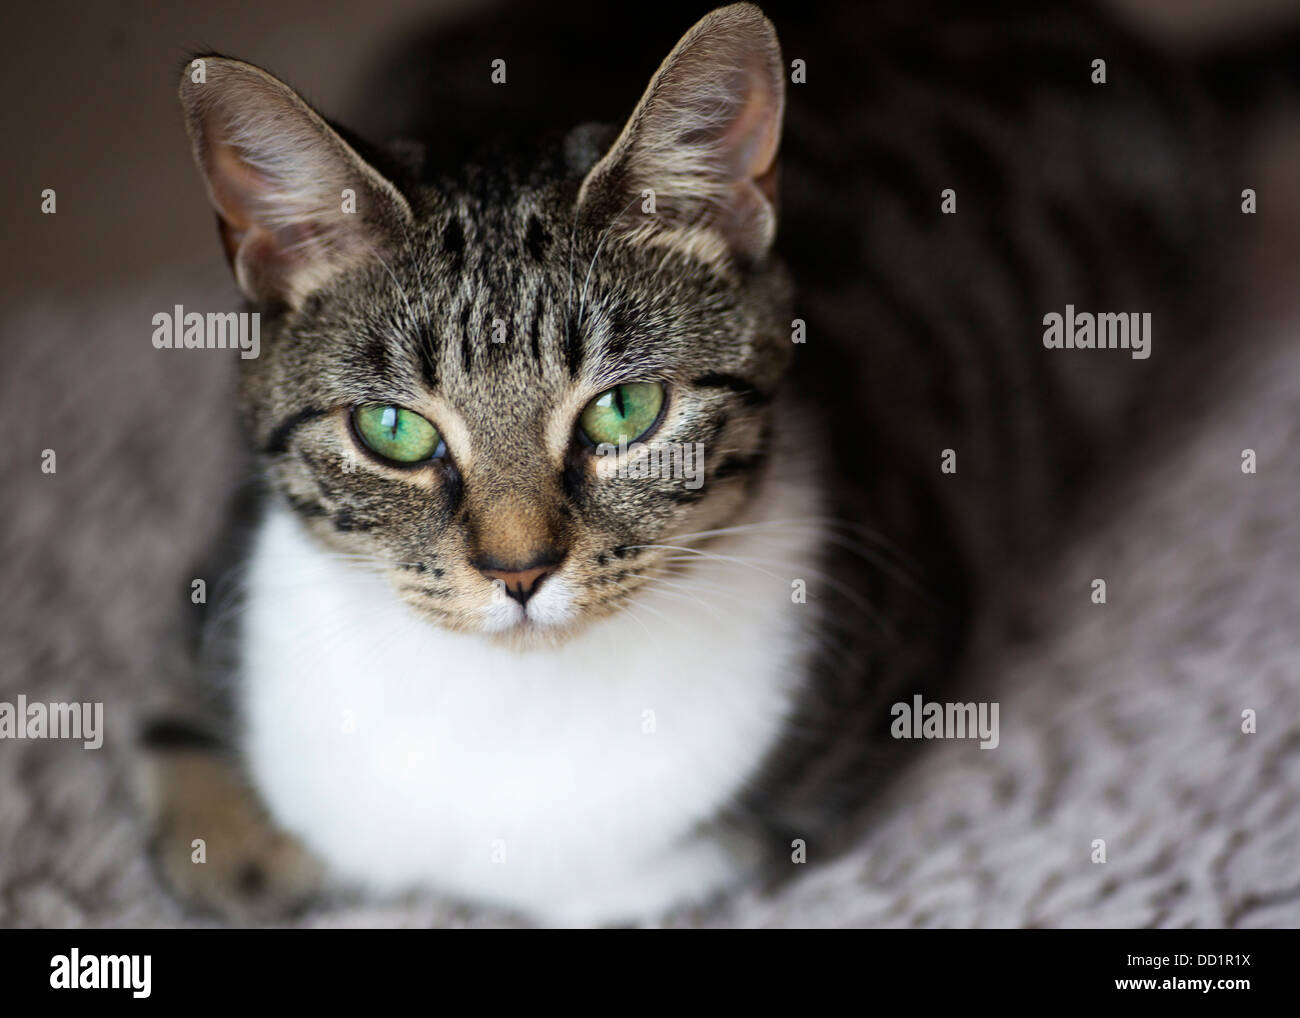 Contented cat with green eyes Stock Photo